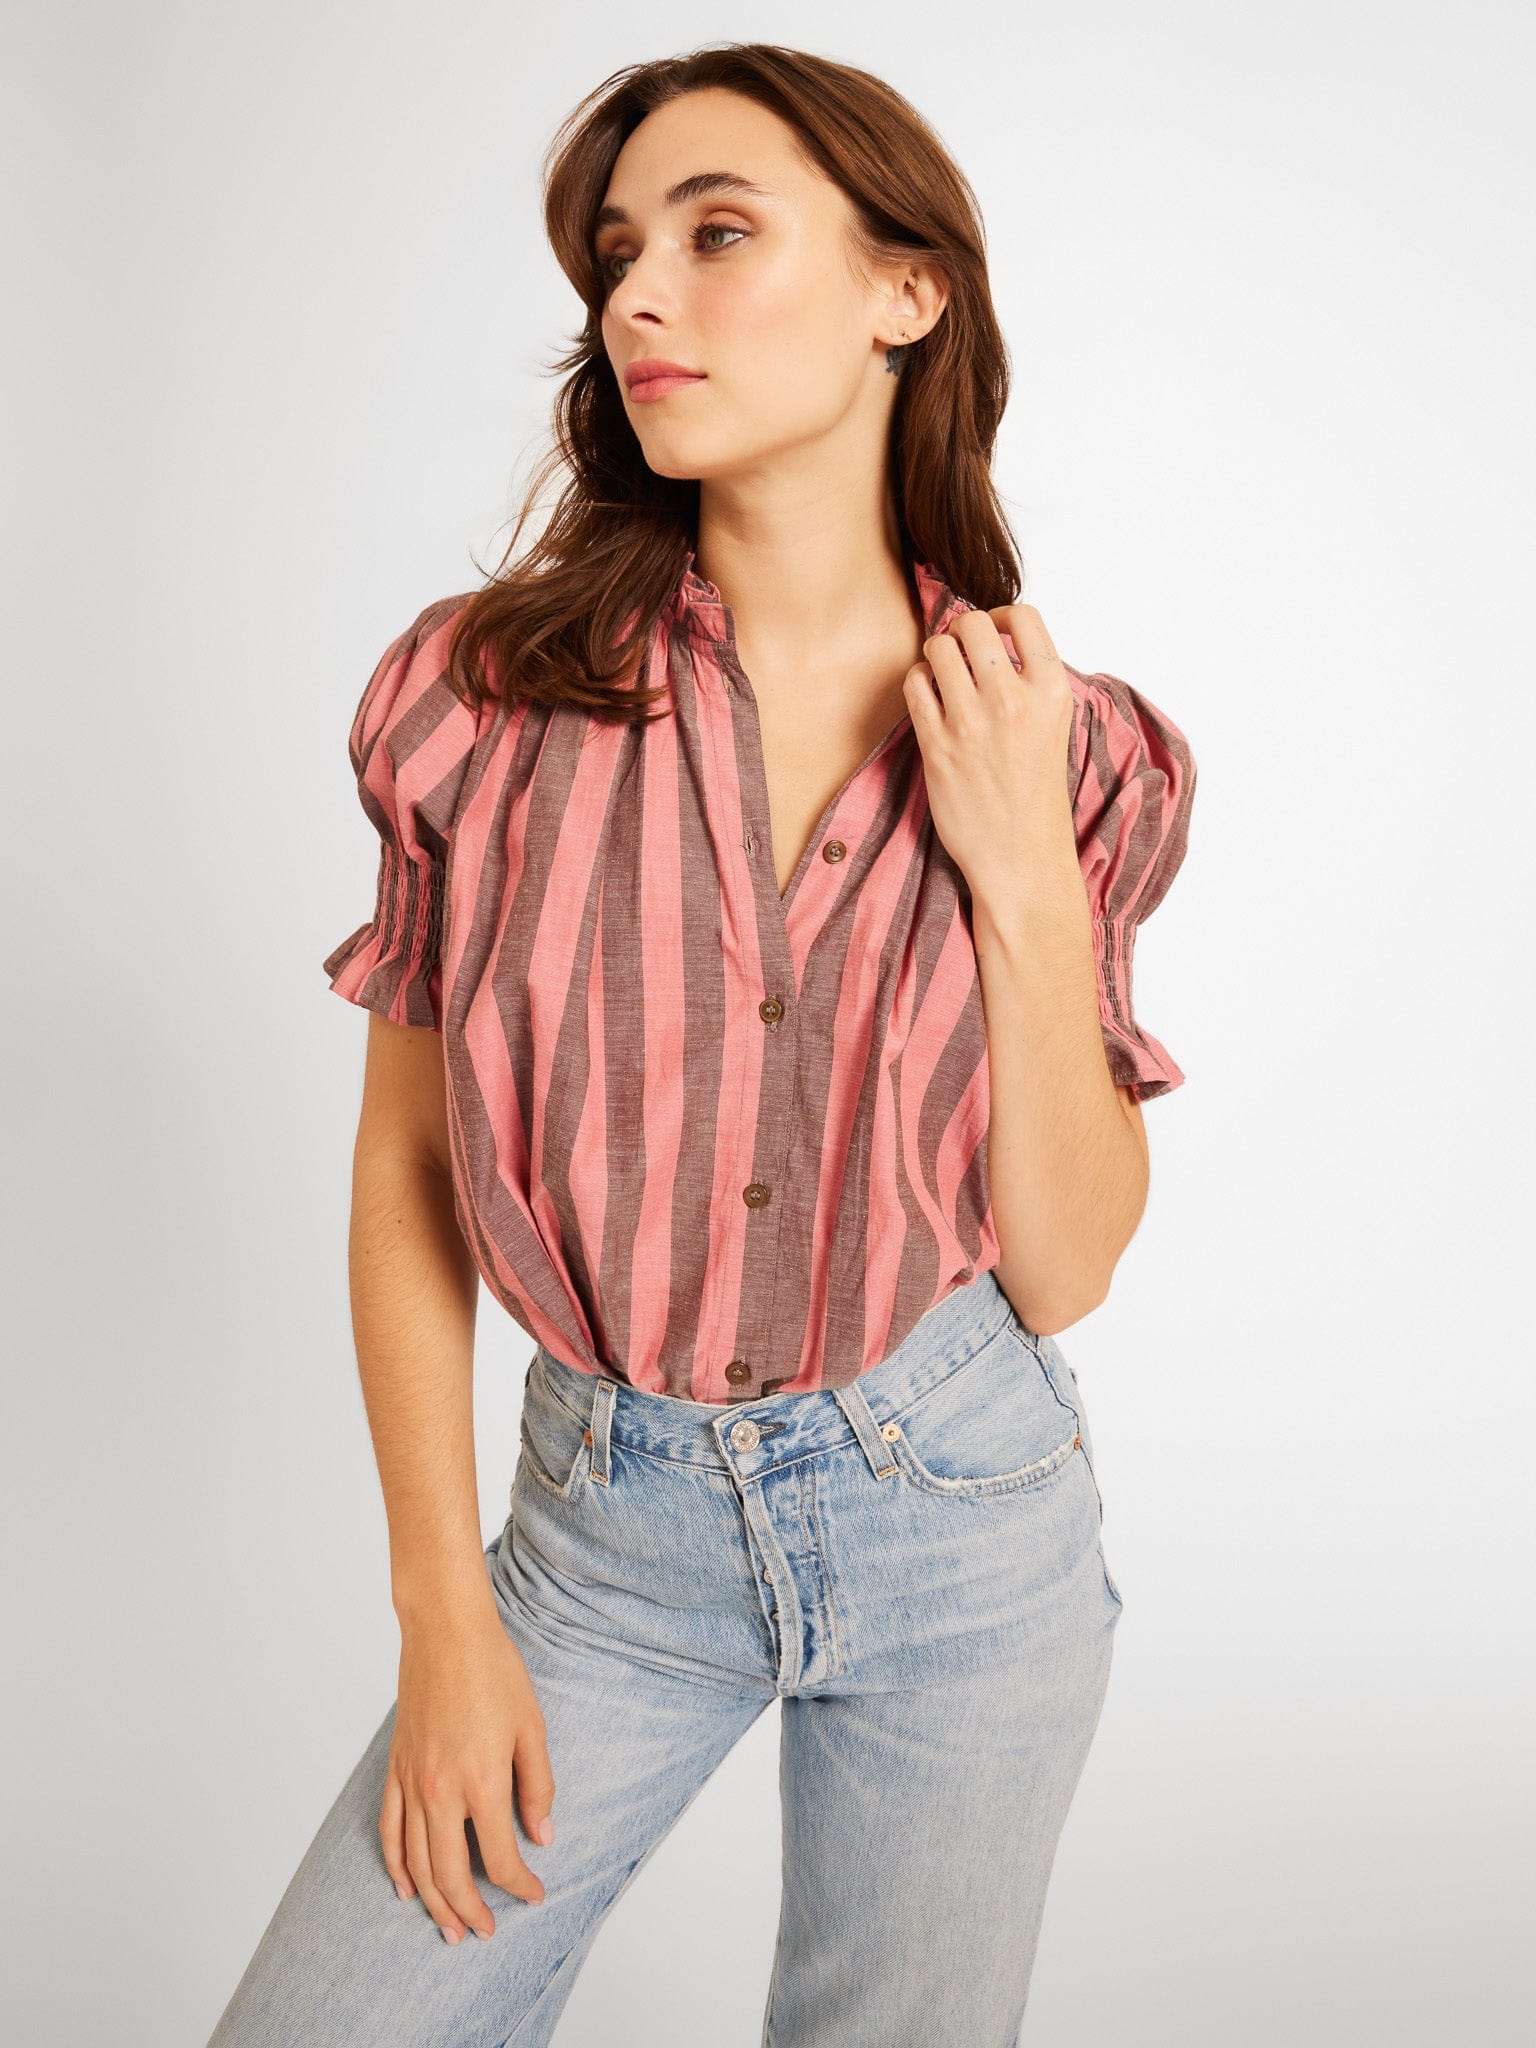 MILLE Clothing Marnie Top in Rosewood &amp; Sable